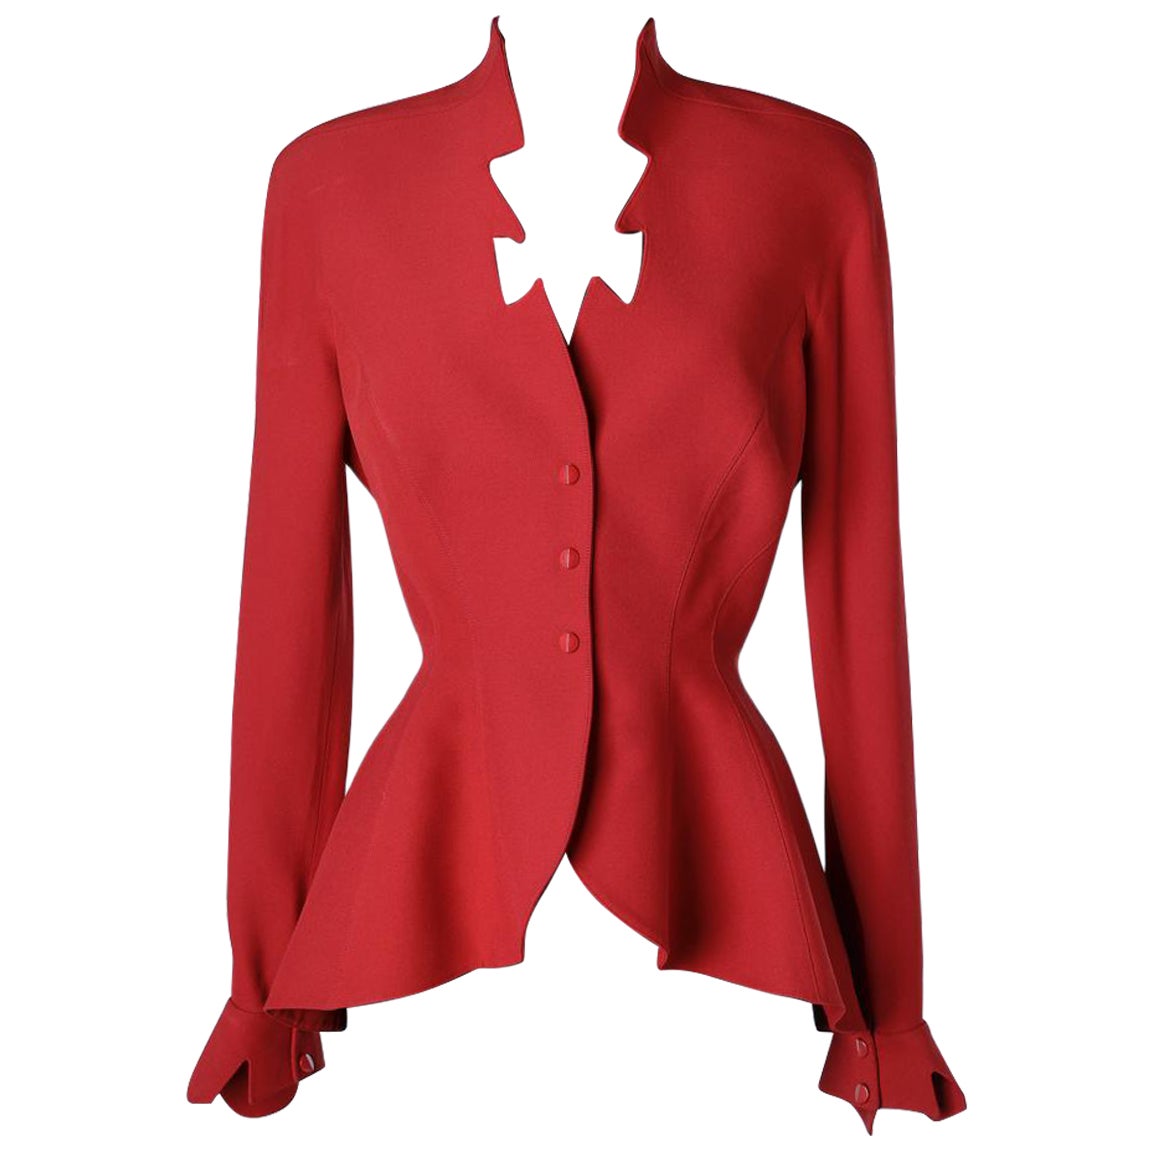 Asymmetrical ruby red sigle breasted jacket with cut-work collar Thierry Mugler 